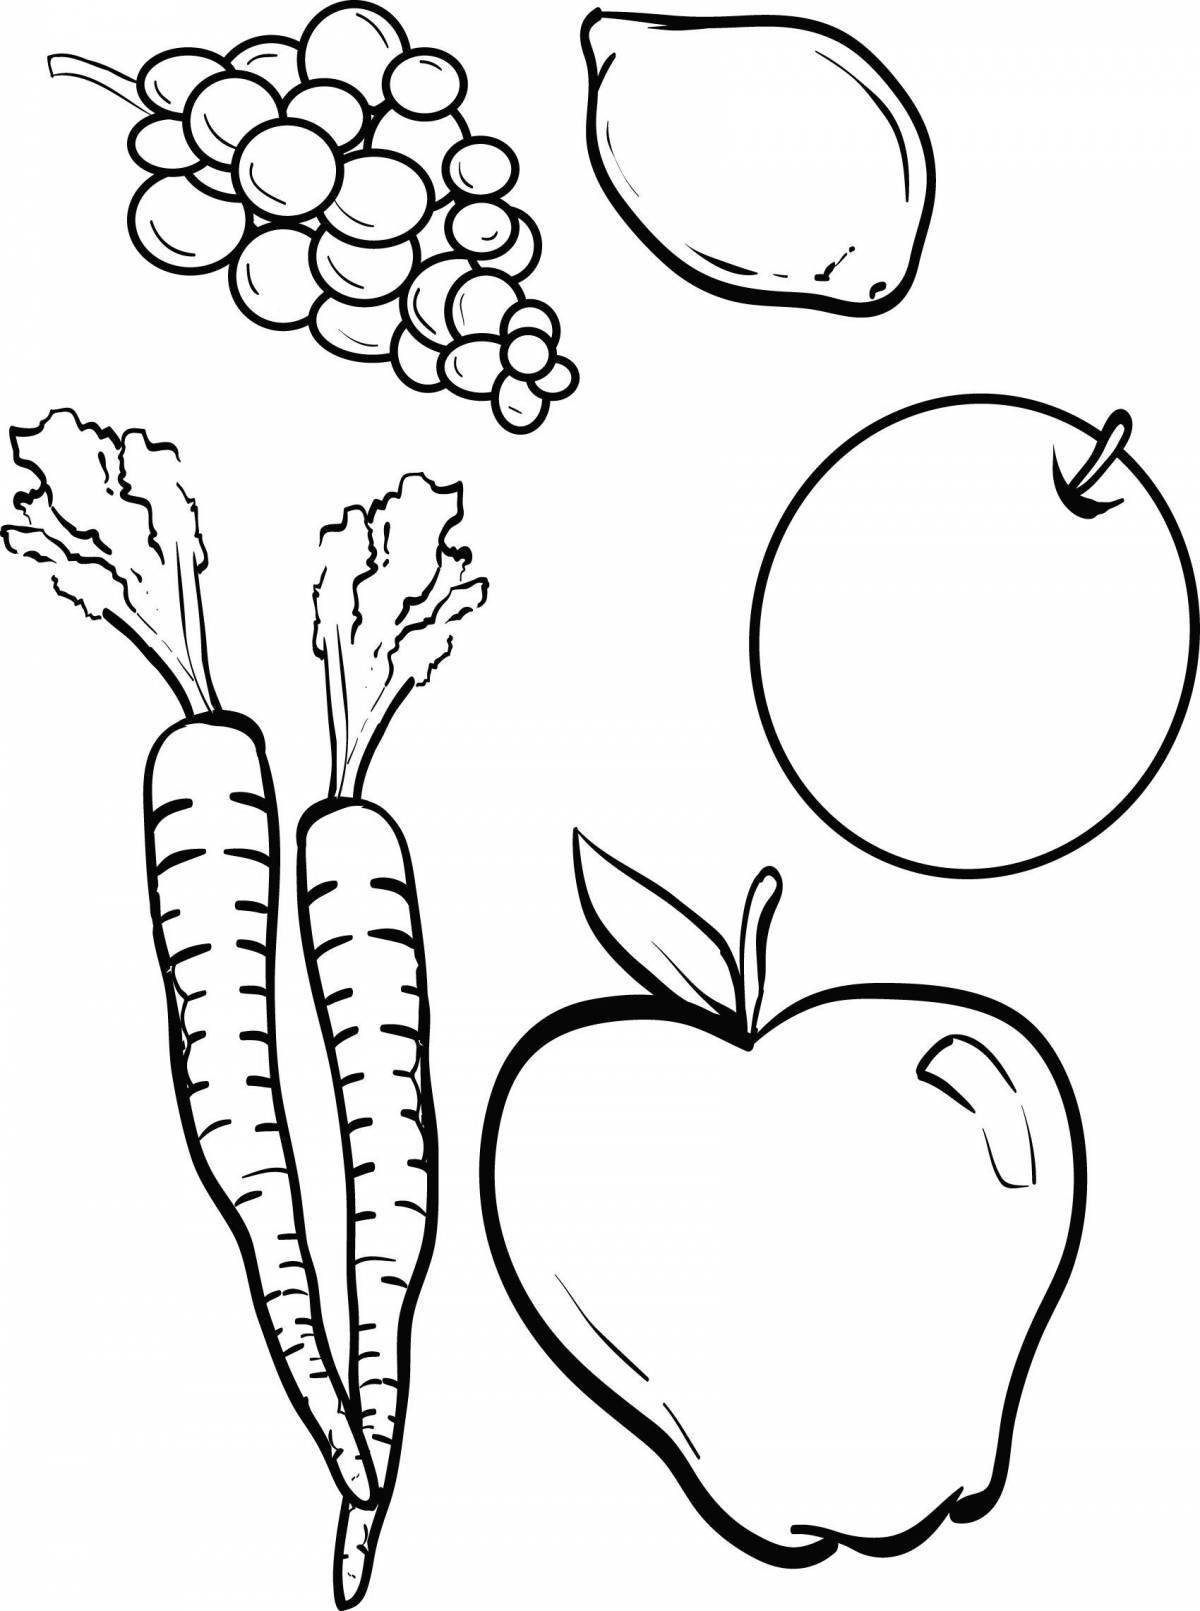 Colorful and attractive fruits and vegetables coloring book